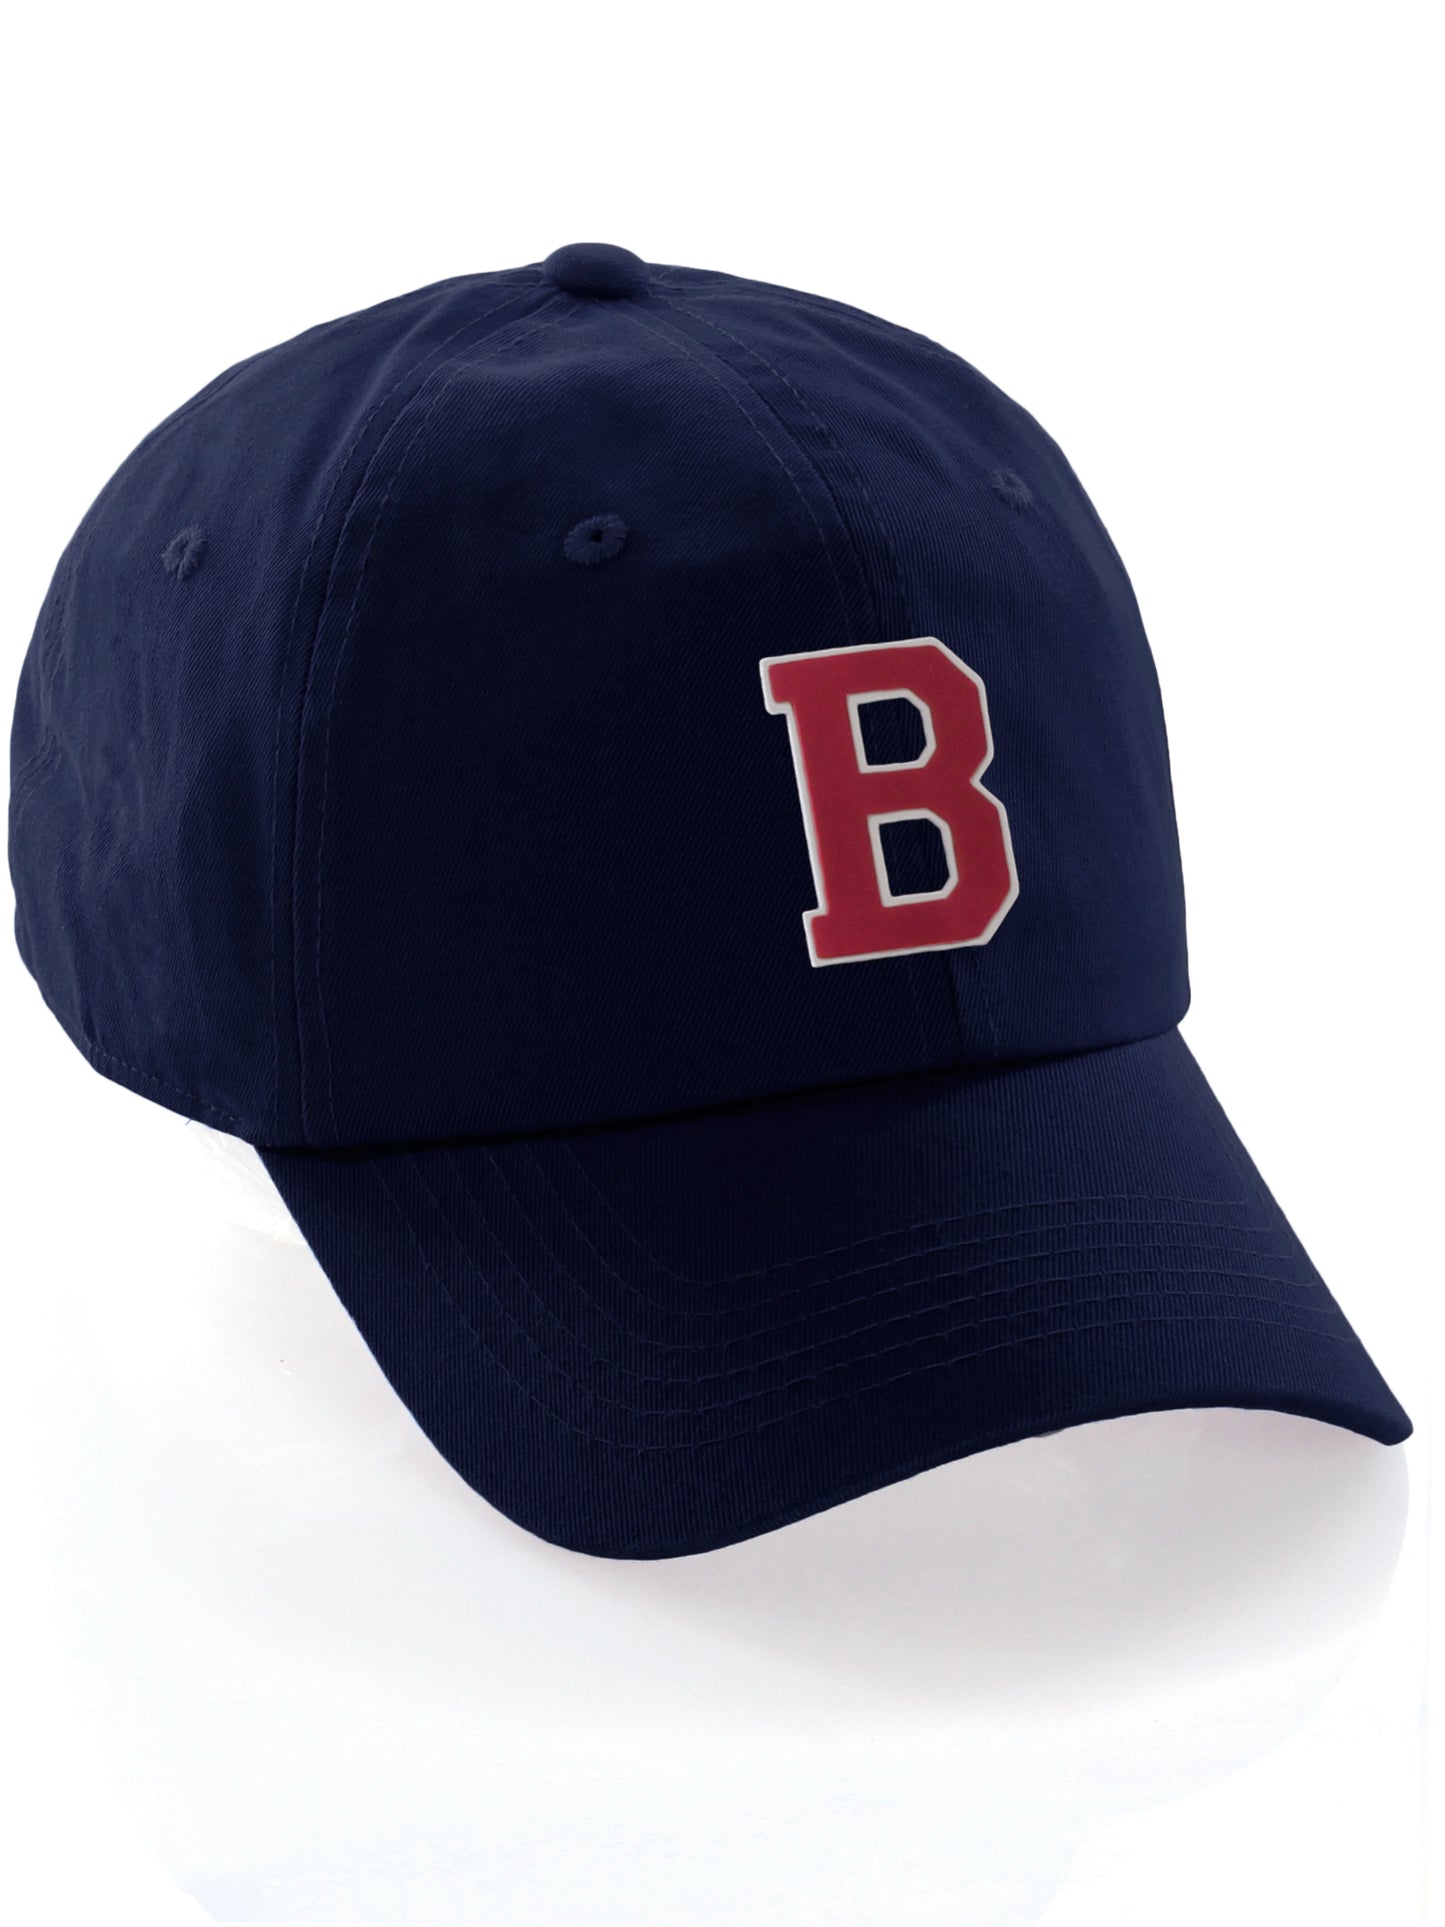 I&W Hatgear Customized Letter Initial Baseball Hat A to Z Team Colors, Navy Cap White Red